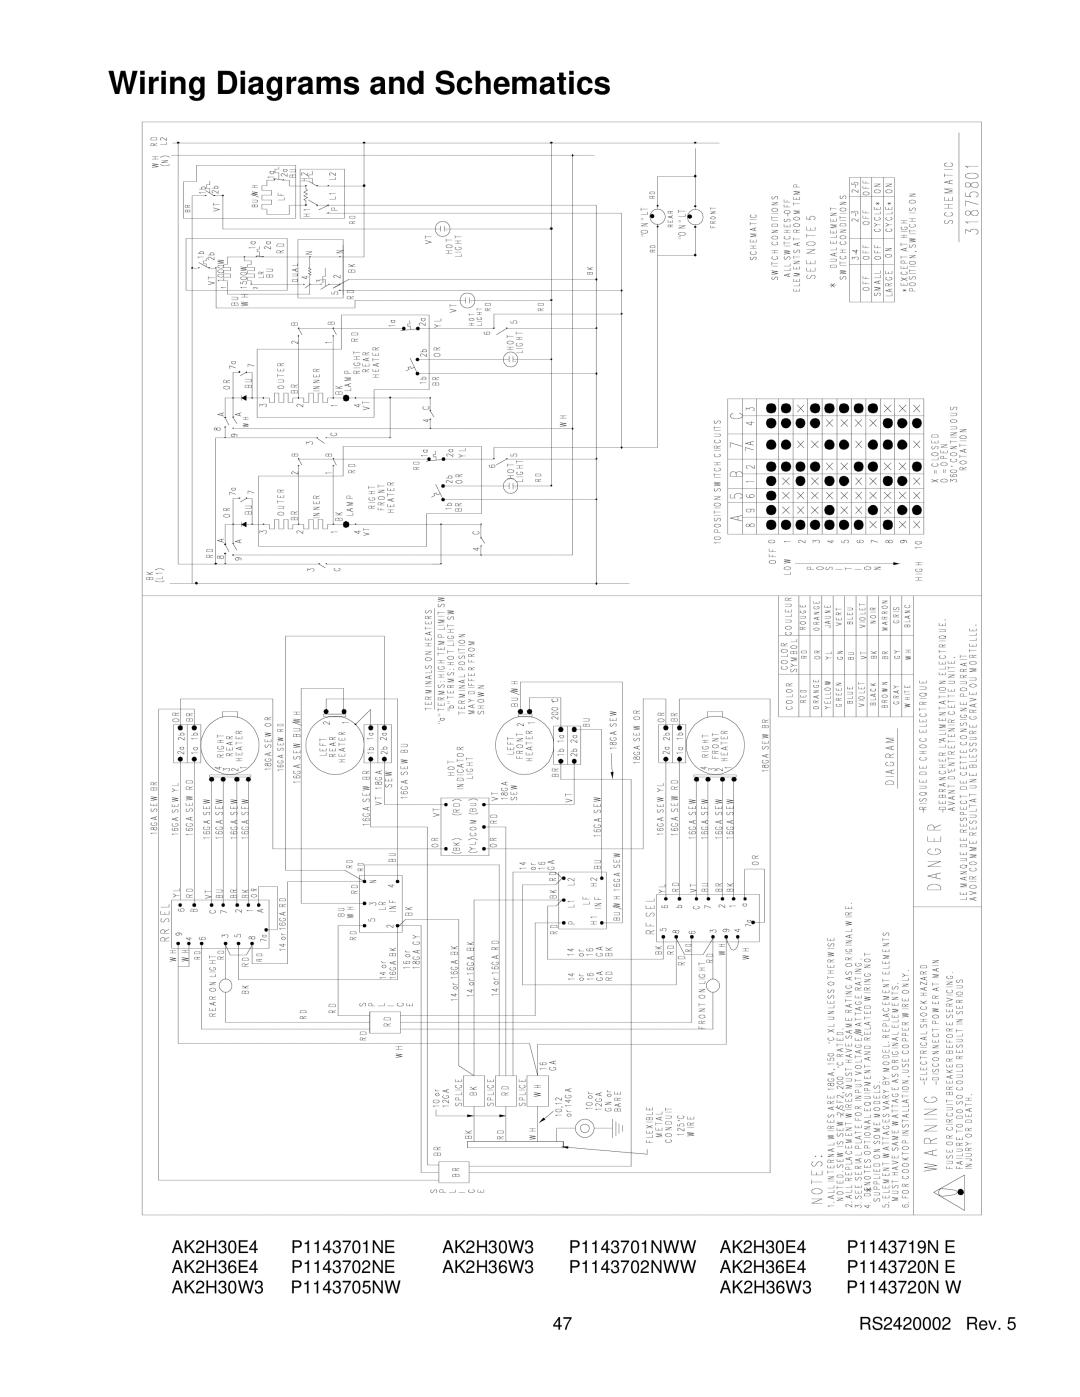 Amana AK2H30, AK2H36E2, AK2HW2, AK2T30/36E1/W1 service manual Wiring Diagrams and Schematics 